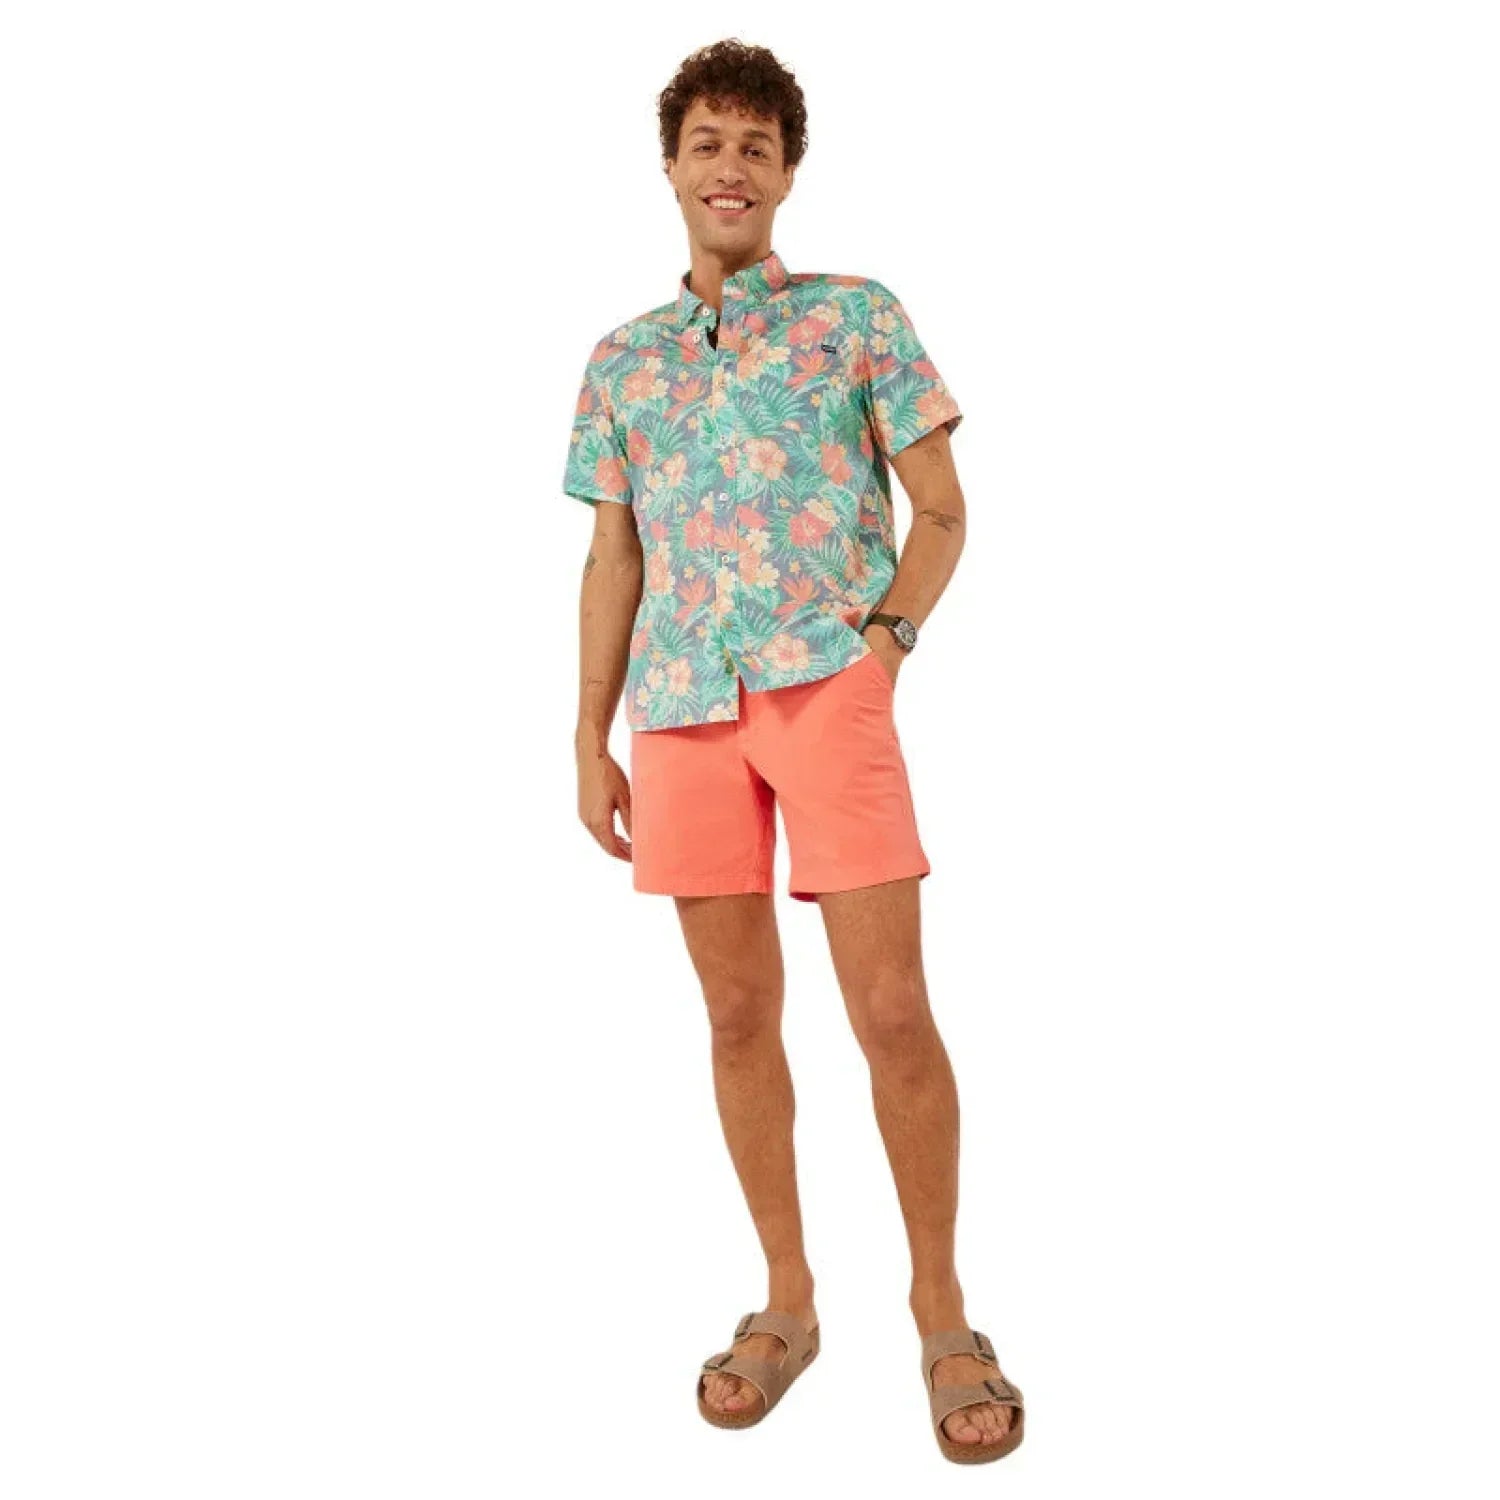 Chubbies 01. MENS APPAREL - MENS SS SHIRTS - MENS SS BUTTON UP Men's Friday Shirt THE LIFE IN PARADISE